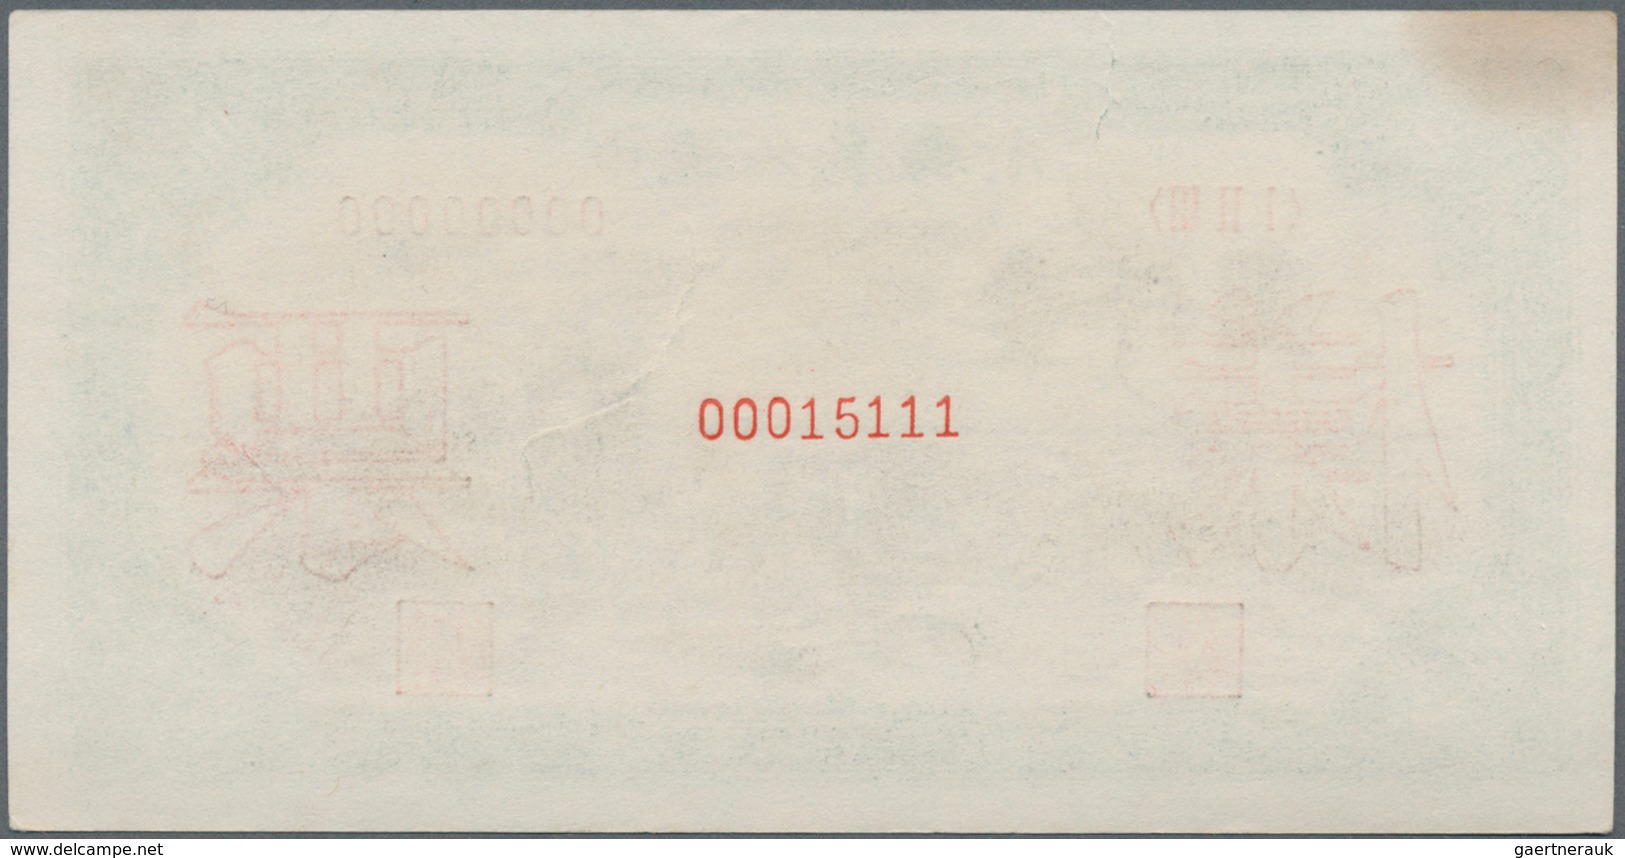 China: Peoples Bank Of China 1000 Yuan 1949 Front And Reverse SPECIMEN, P.849s With Specimen Number - China